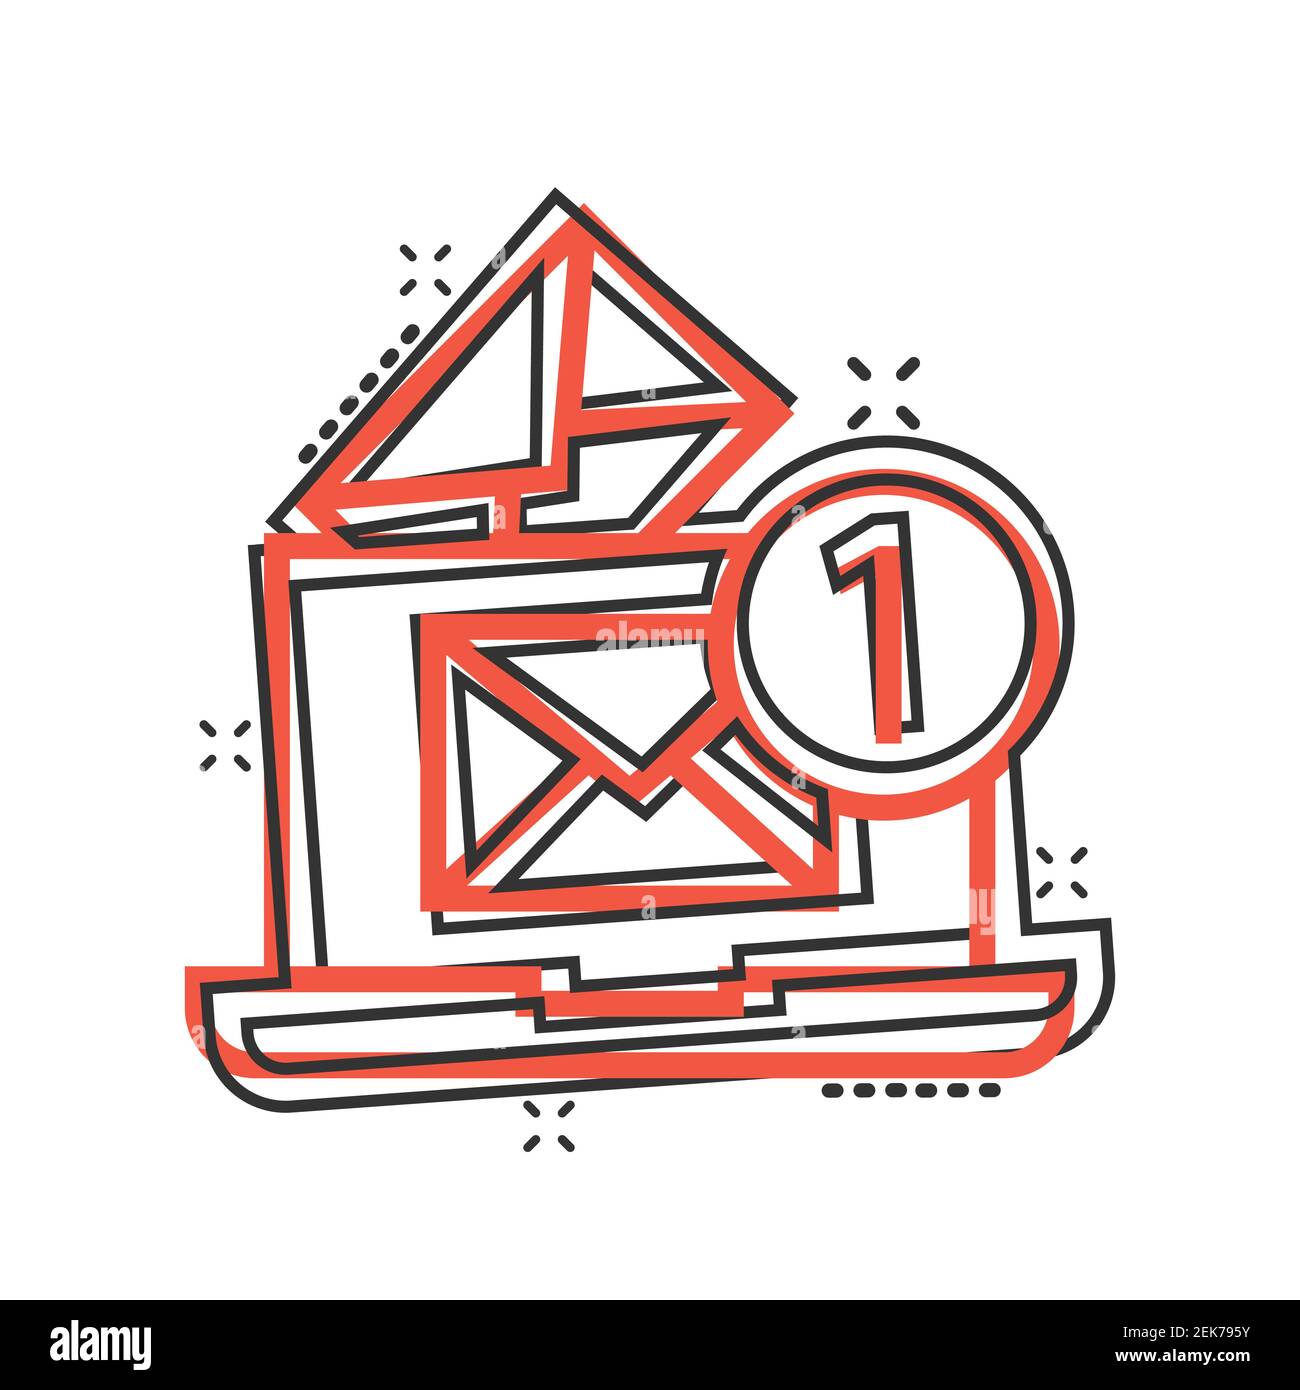 Red Envelope Vector Art, Icons, and Graphics for Free Download